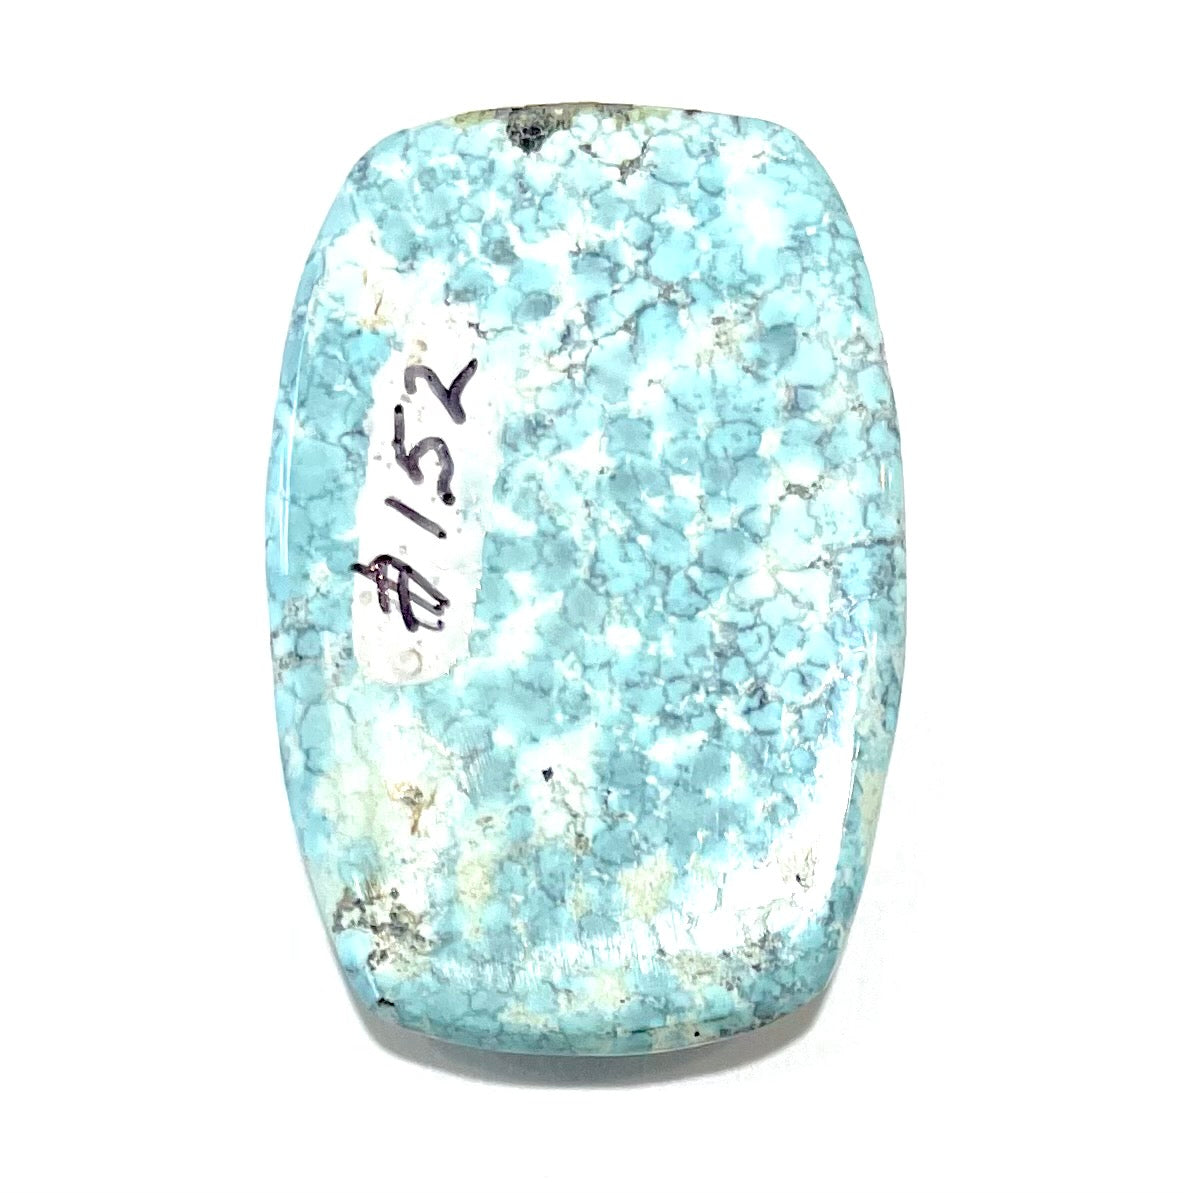 A loose, barrel cabochon cut turquoise stone from Baja California.  The piece is light blue with a gray matrix.